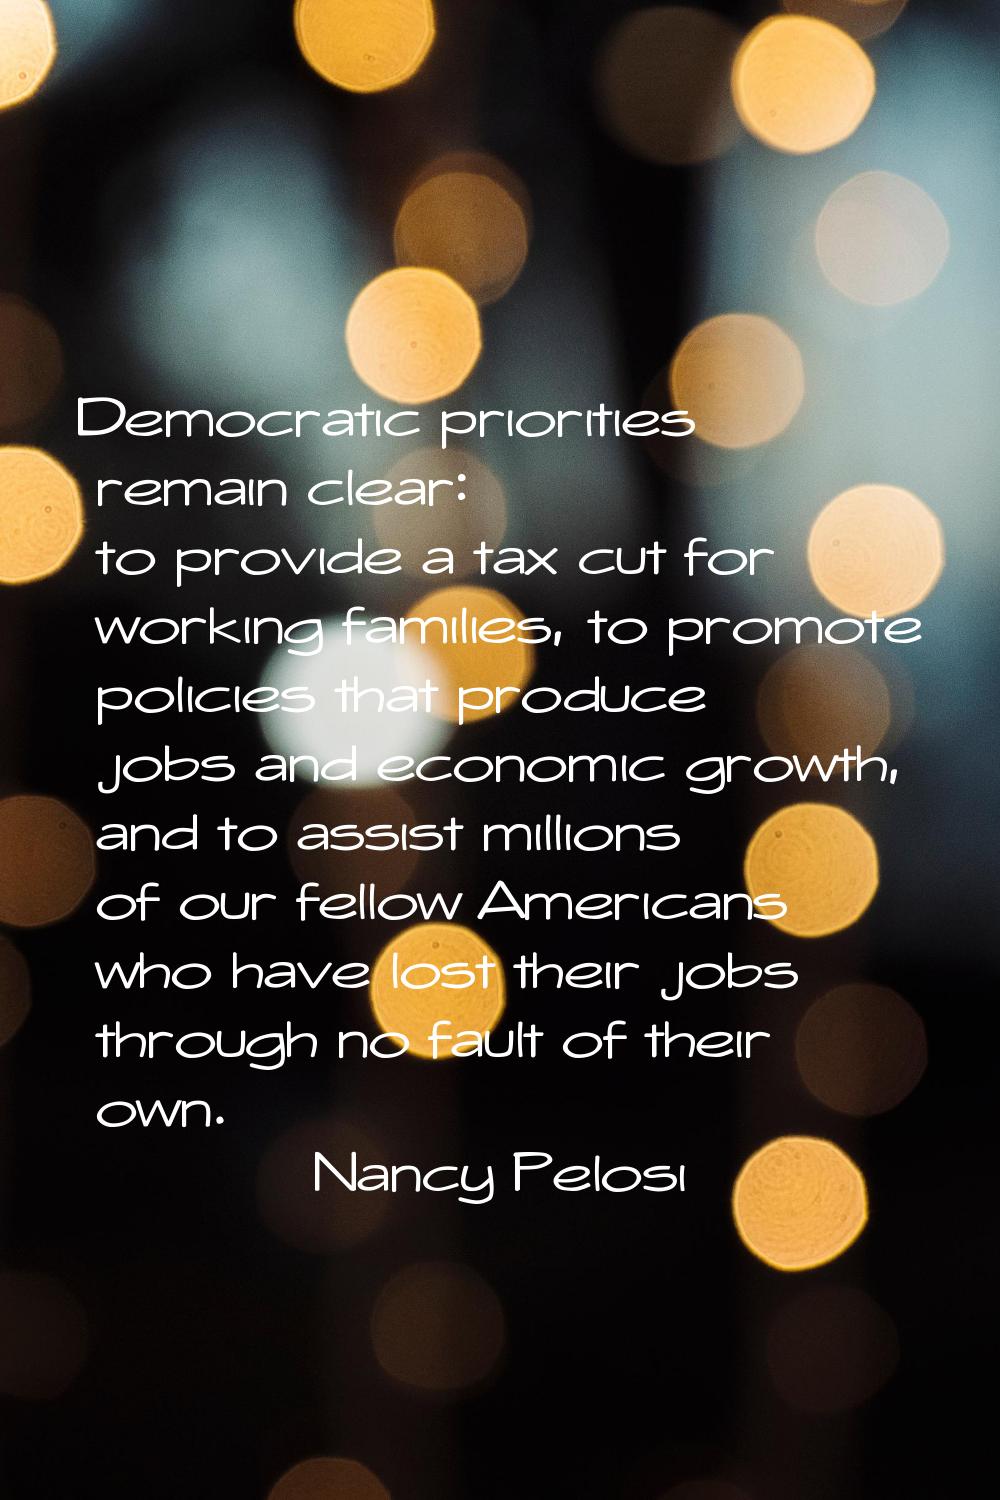 Democratic priorities remain clear: to provide a tax cut for working families, to promote policies 